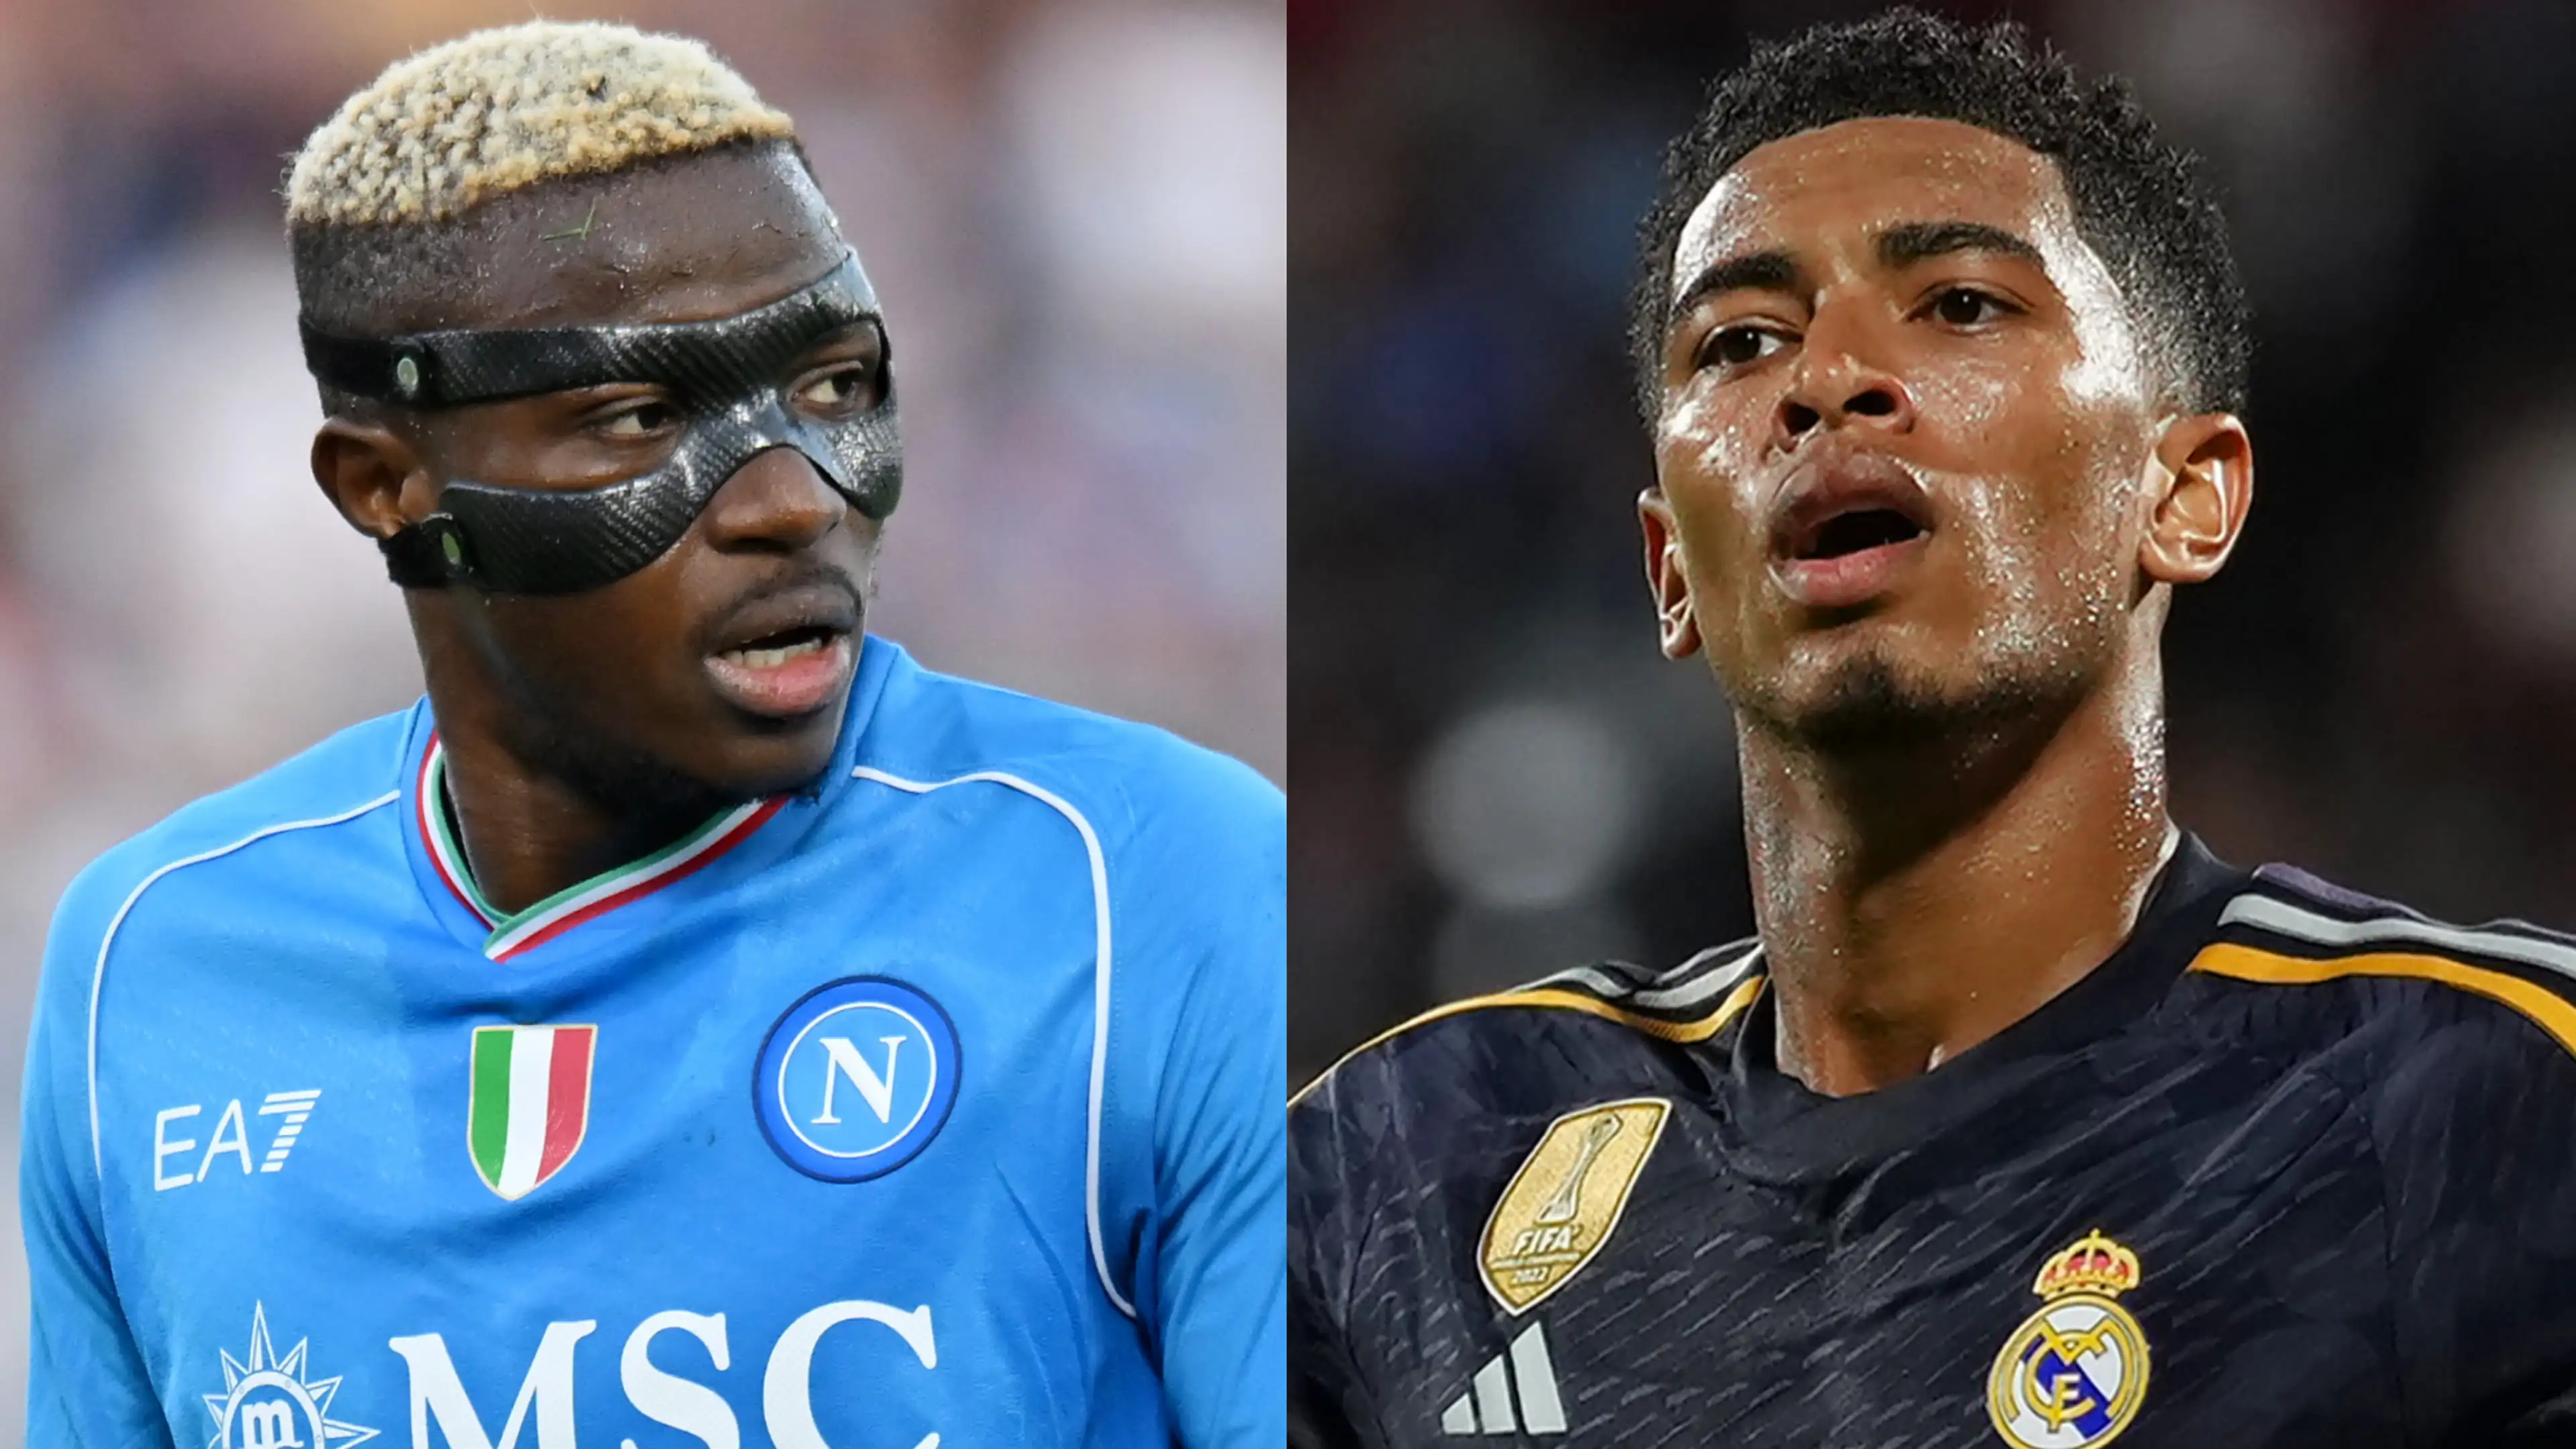 sokapro-UEFA Champions League: Napoli take on Real Madrid tonight. Who will be victorious? Will it be Osimhen or Bellingham?